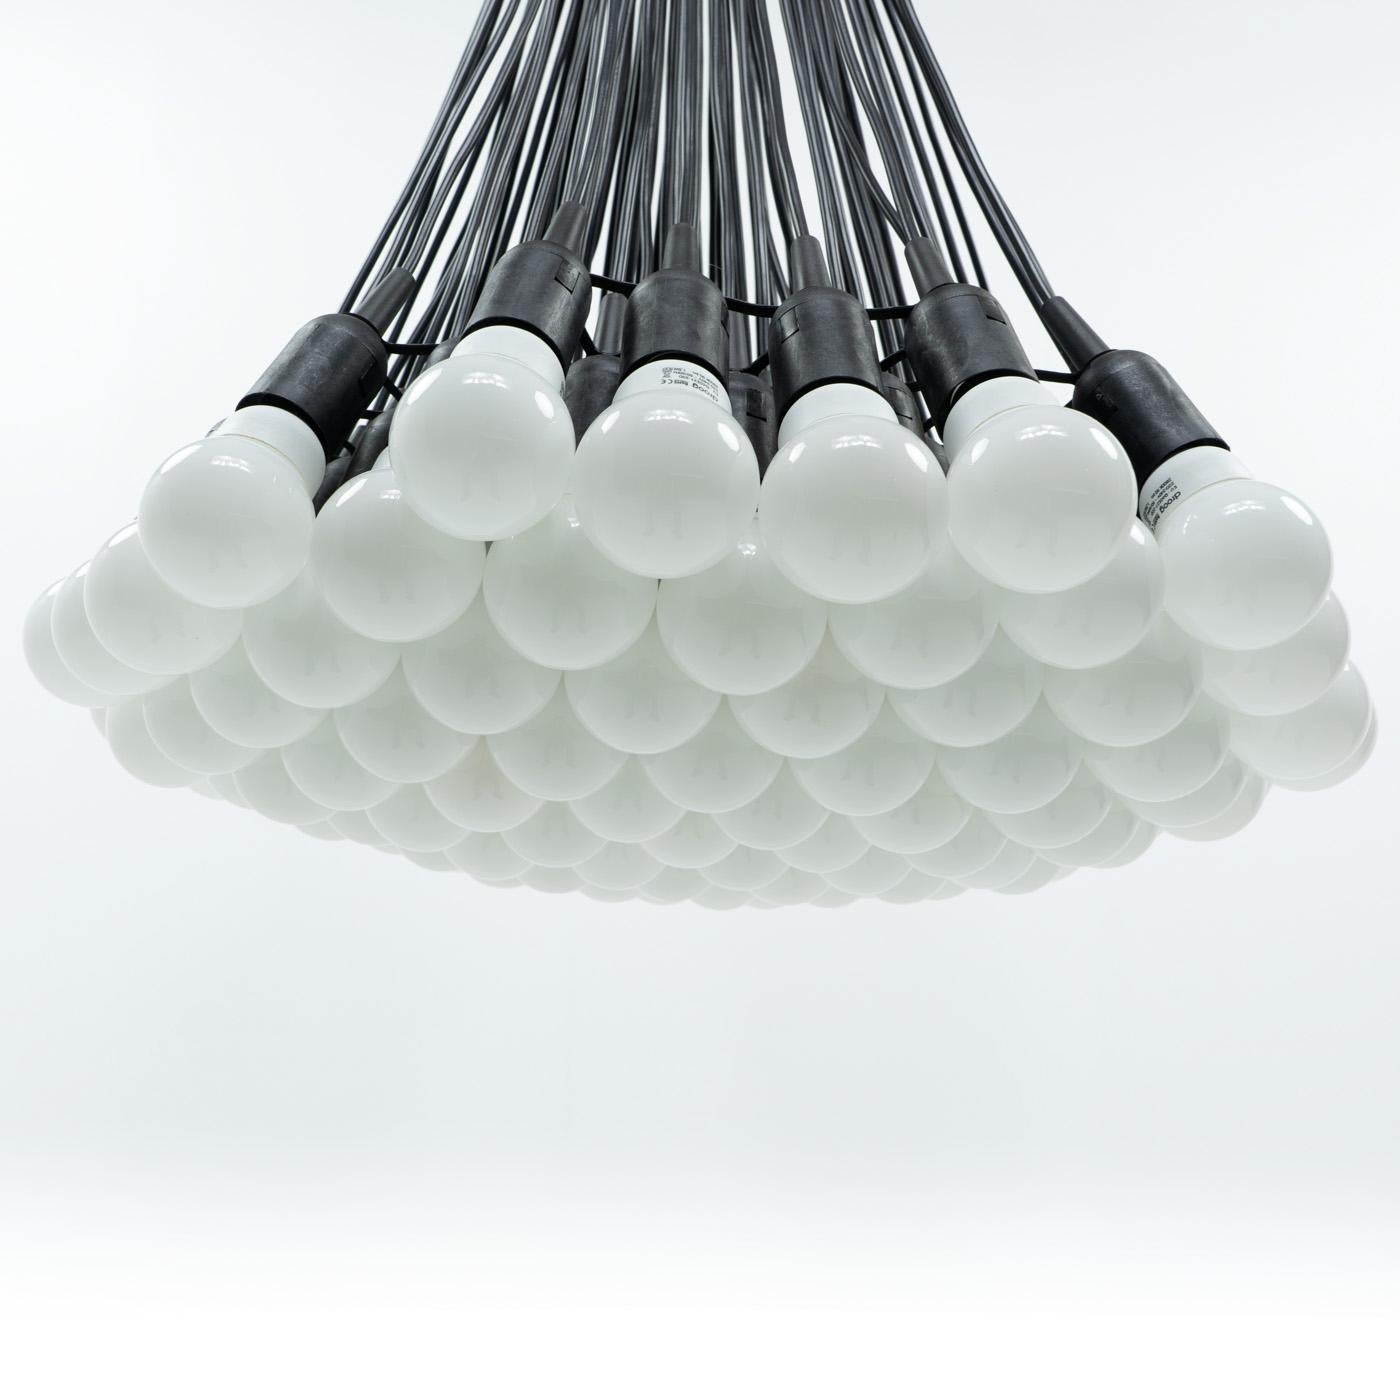 85 LED Lamps, by Rody Graumans for Droog design -  1990s For Sale 11